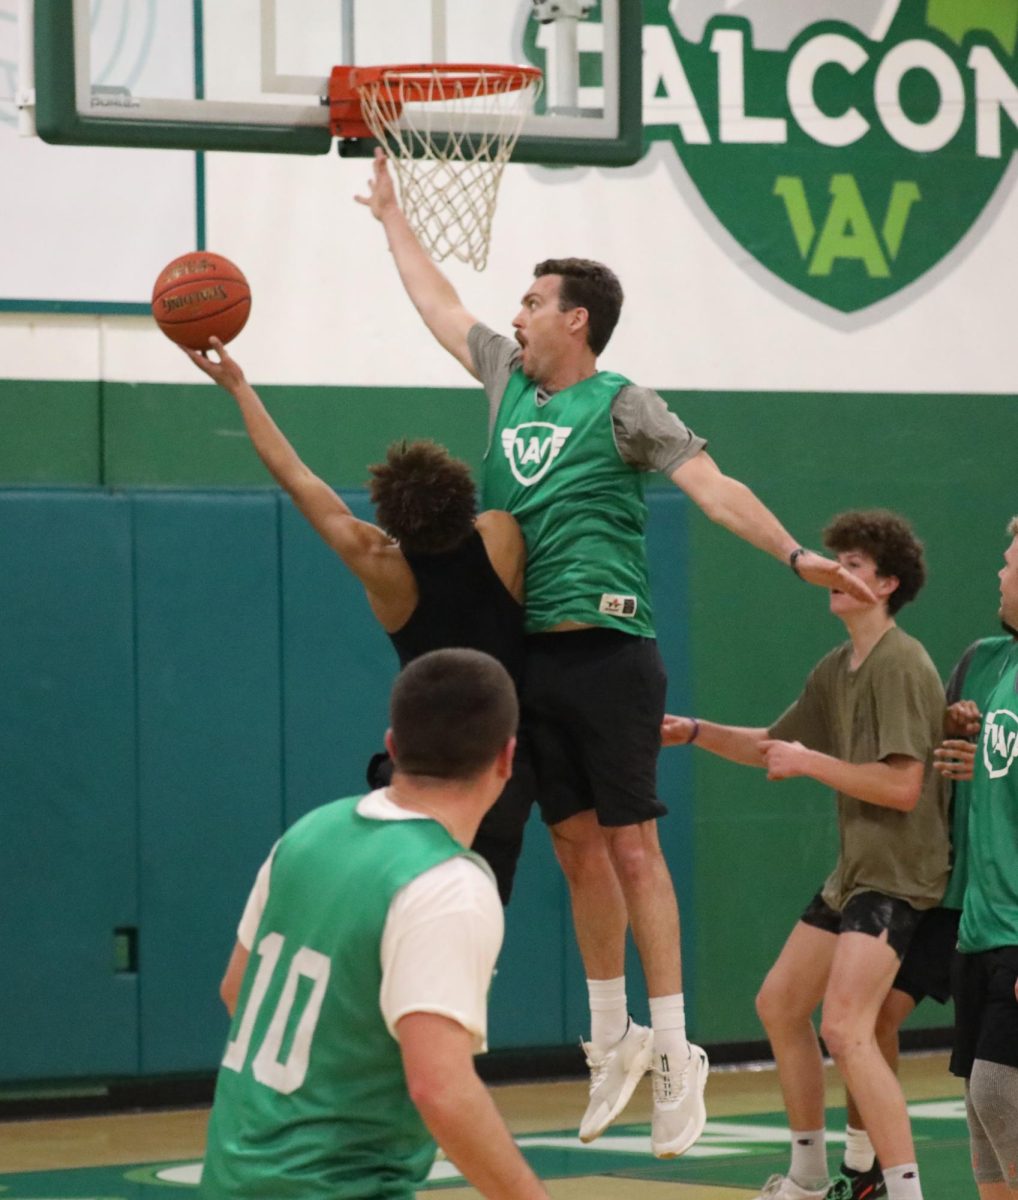 Archie Williams P.E. teacher Tim Parnow jumps to block a shot from sophomore Kai Smith during a Staff vs Student basketball game on Feb. 9.